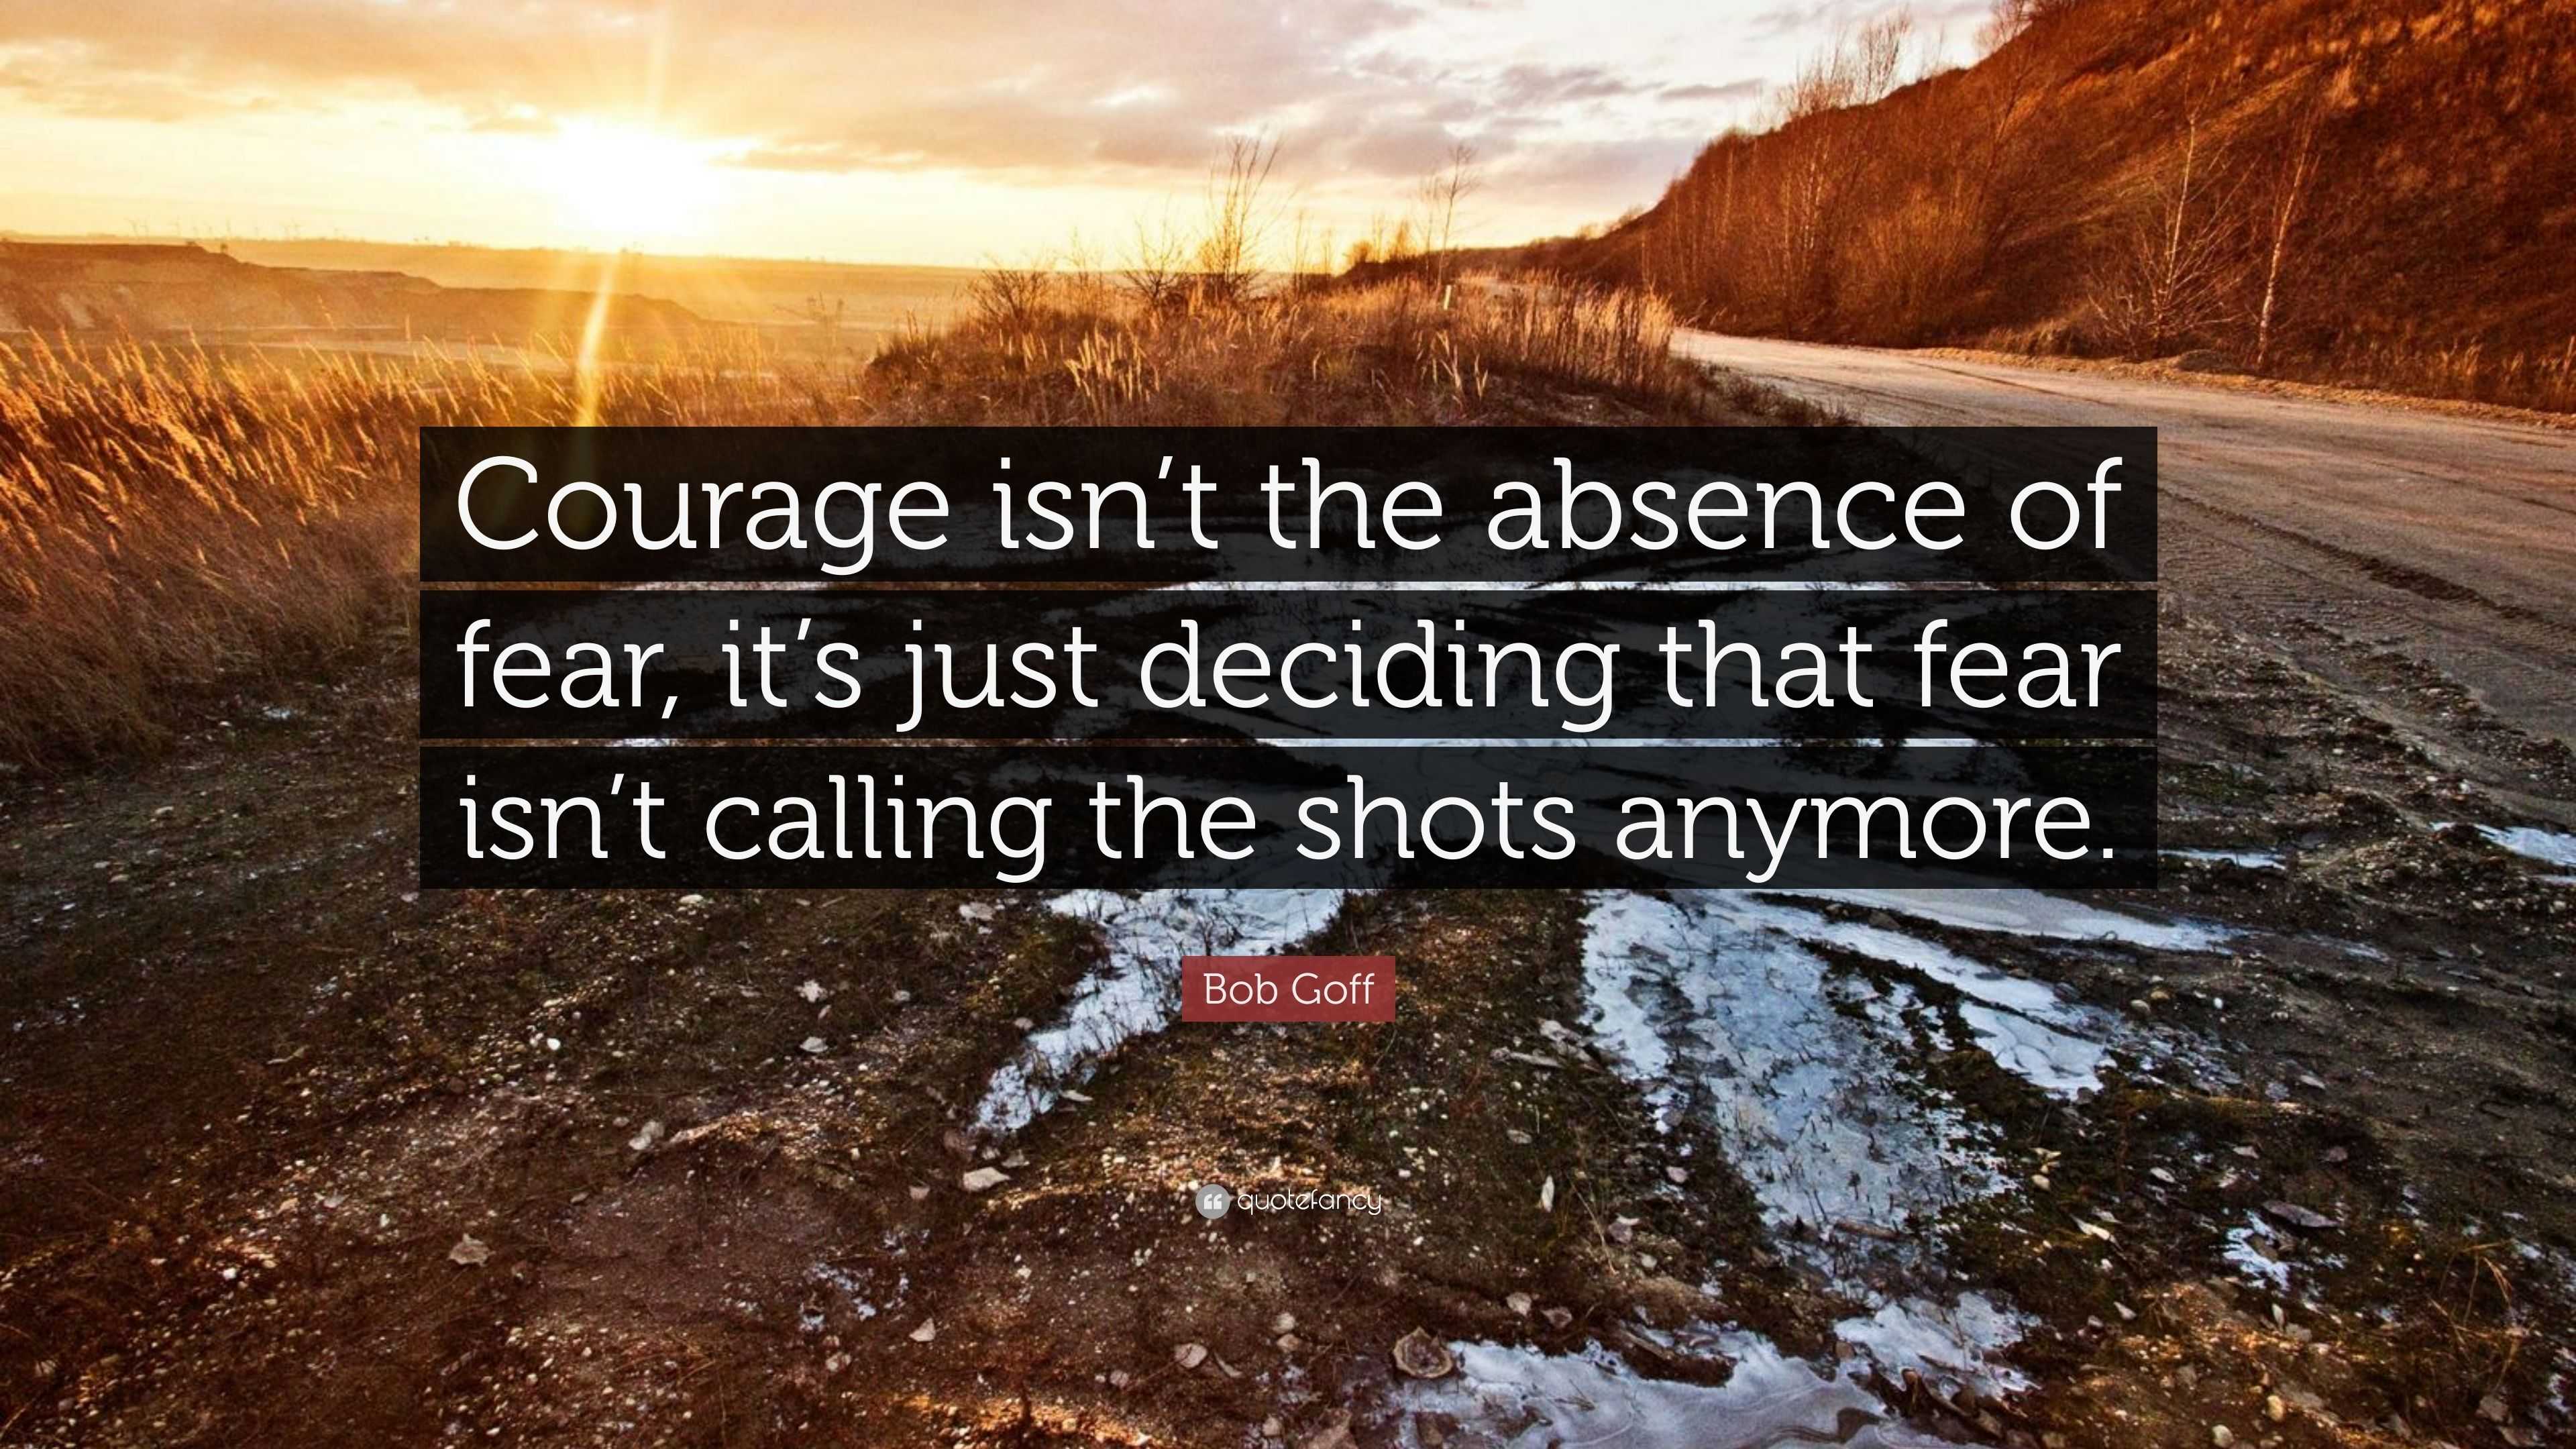 Bob Goff Quote Courage Isn T The Absence Of Fear It S Just Deciding That Fear Isn